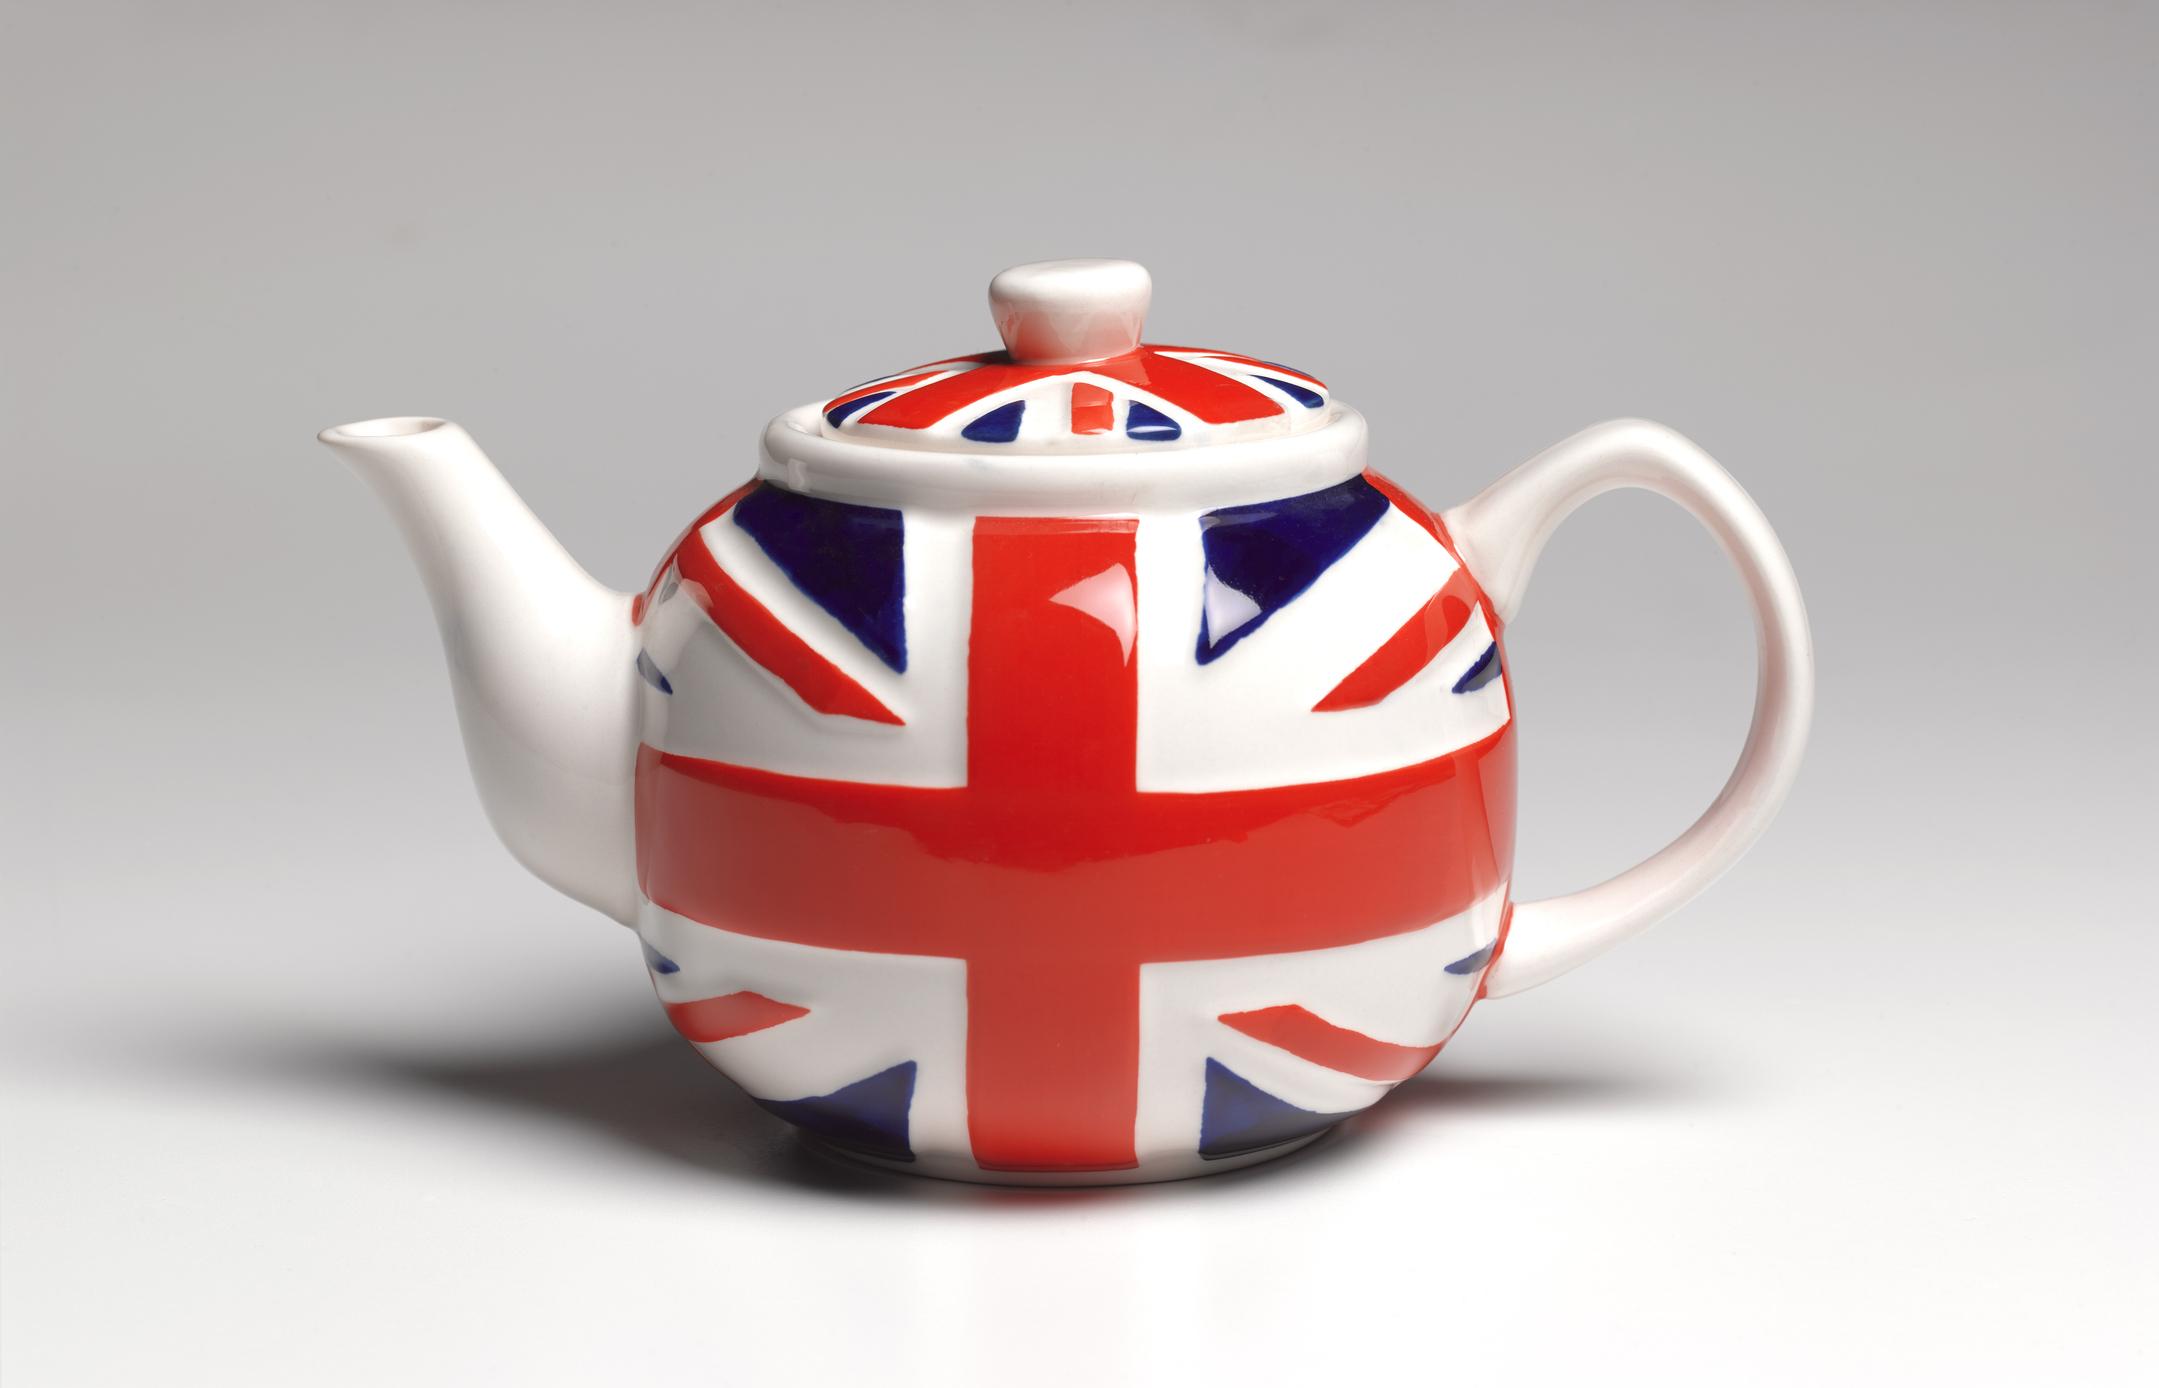  Close up of a union jack patterned teapot on white background 